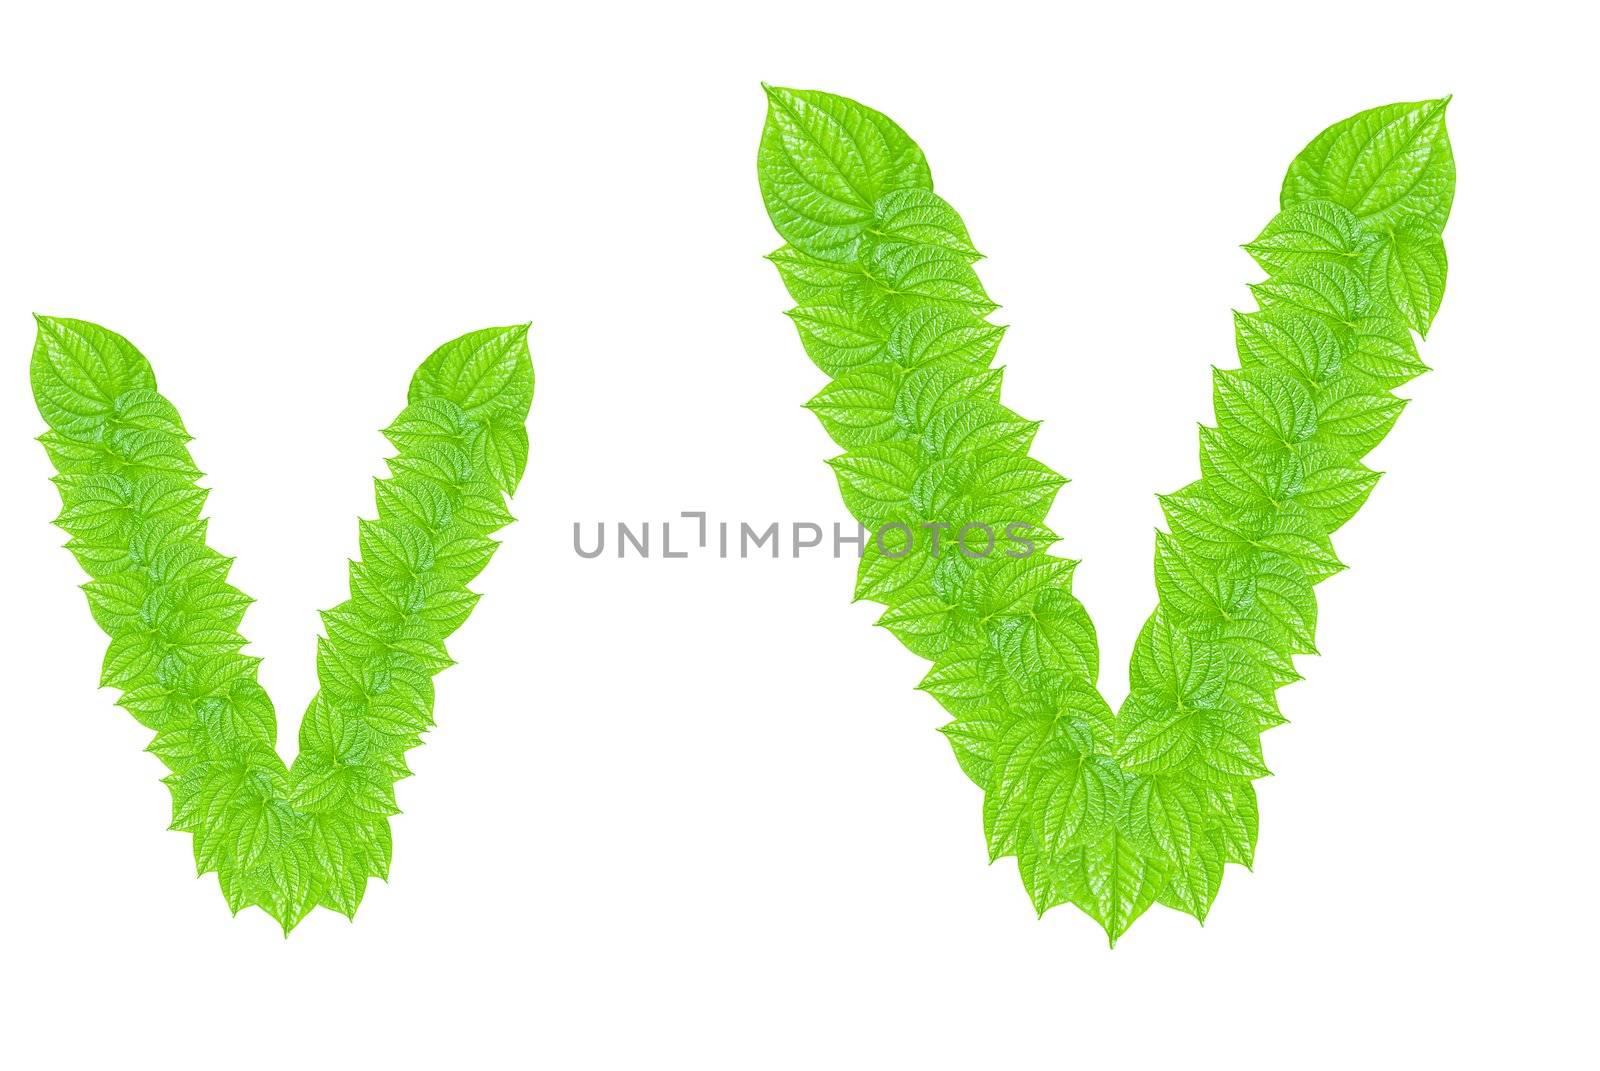 English alphabet made from green leafs with letter V in small capital and large capital letter